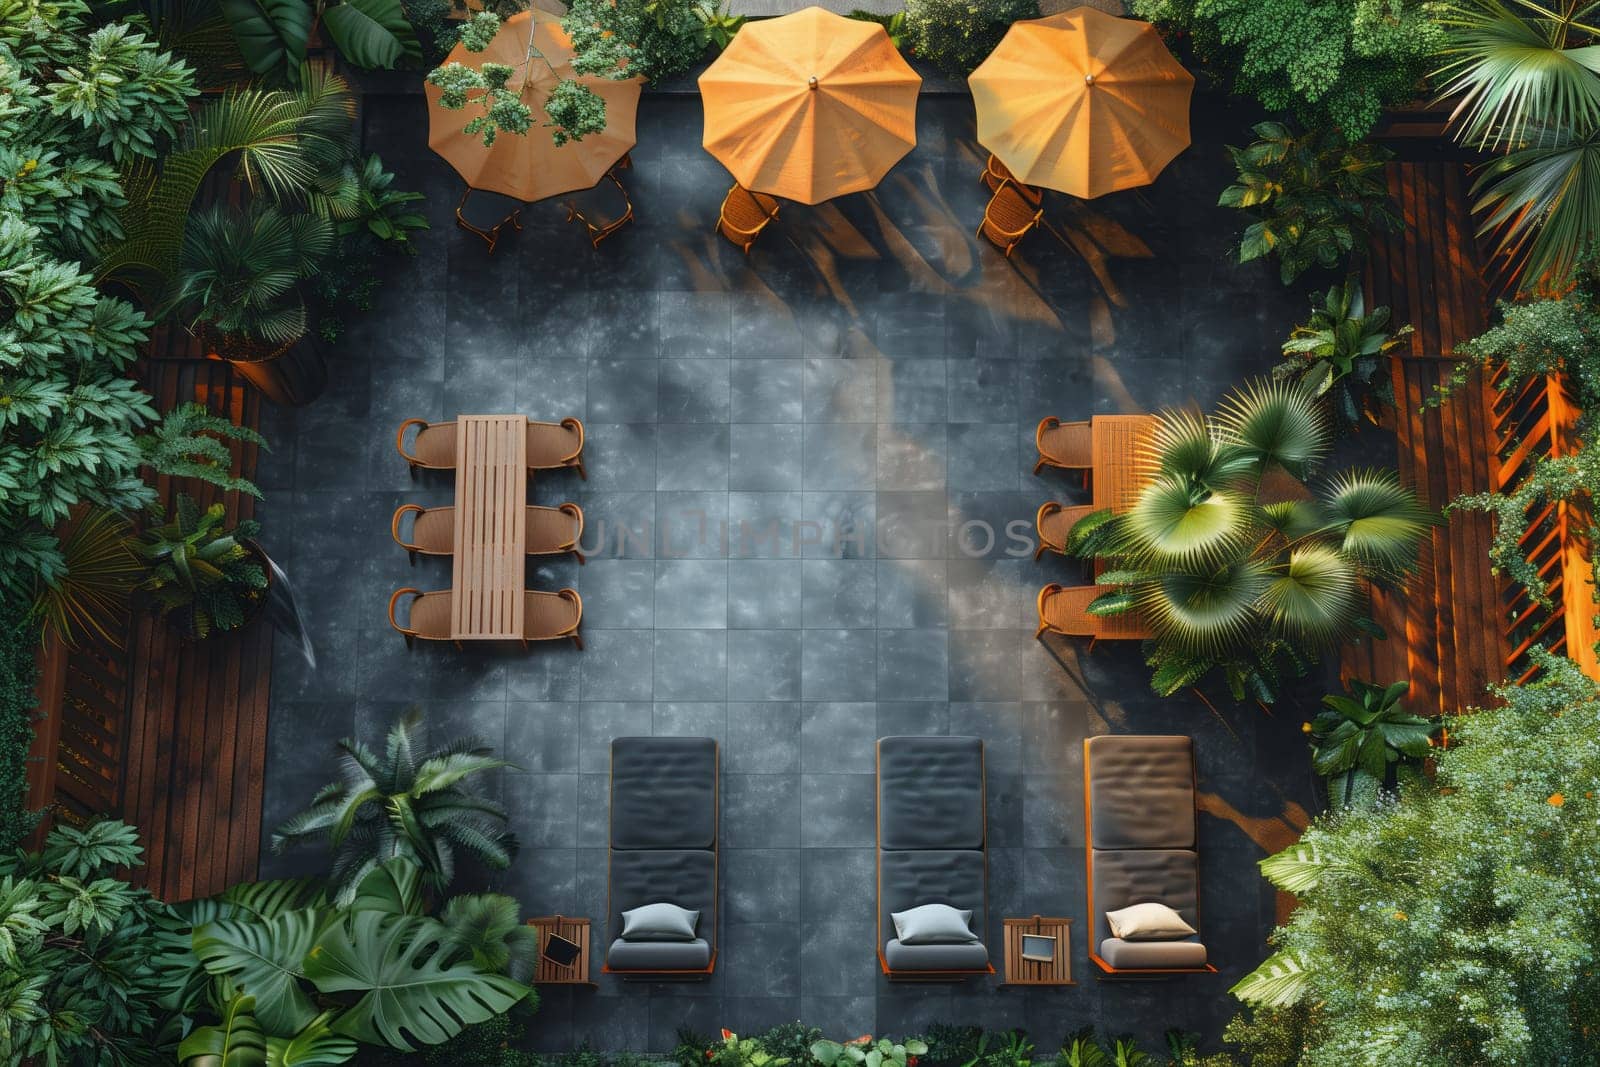 Aerial view of a patio with tables, chairs, umbrellas, and plants by richwolf